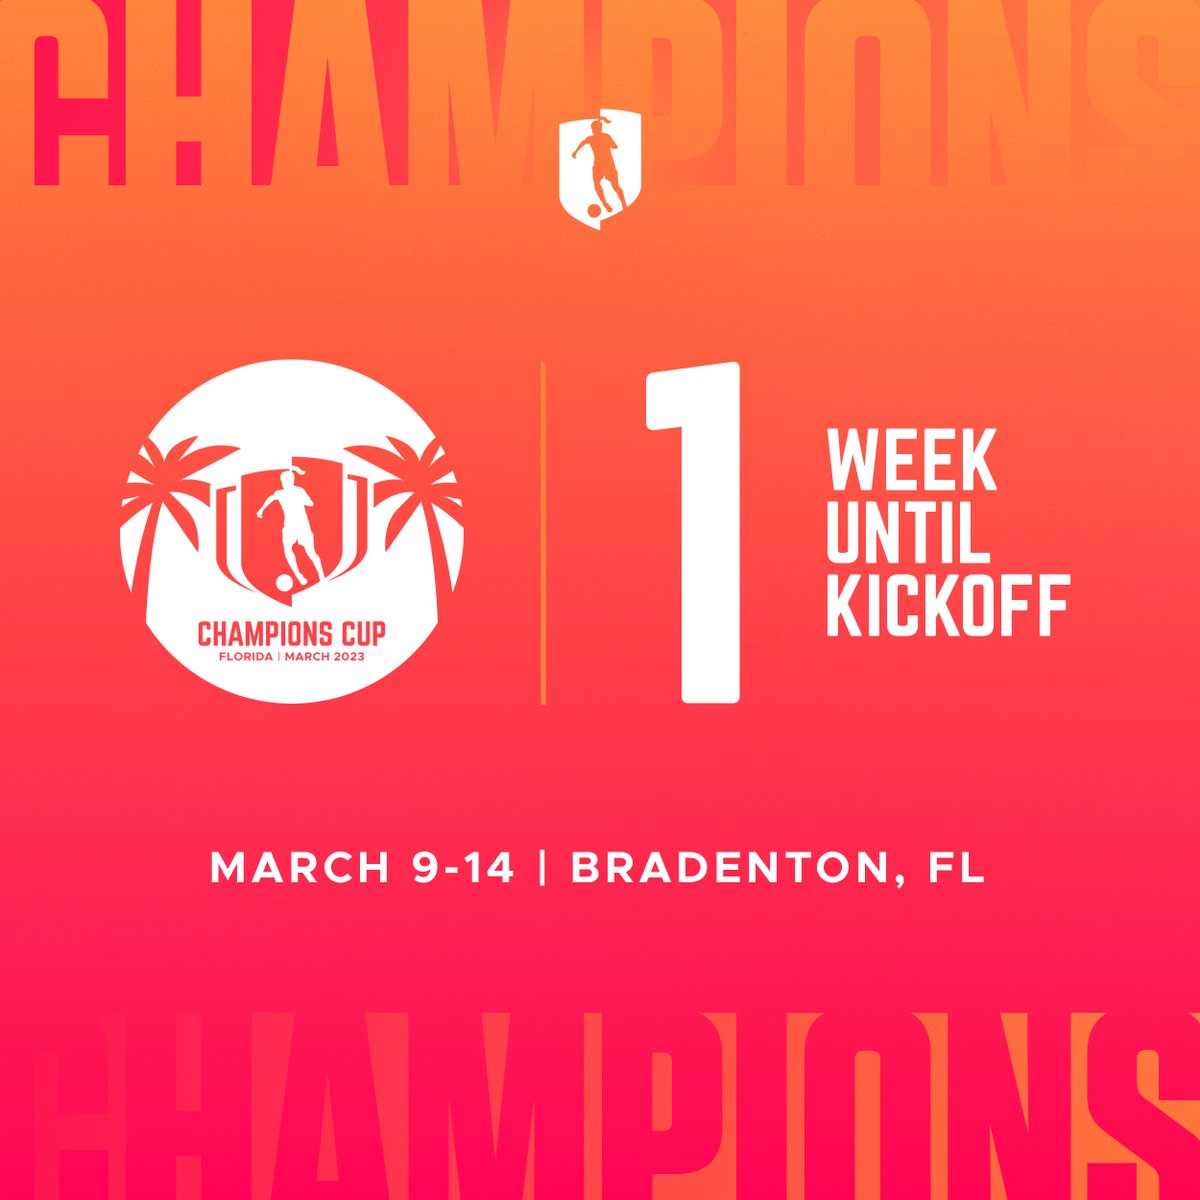 Exactly 1️⃣ week from today #GAChampionsCup kicks off in Florida!! Who else can't wait?!?! 🙋‍♀️